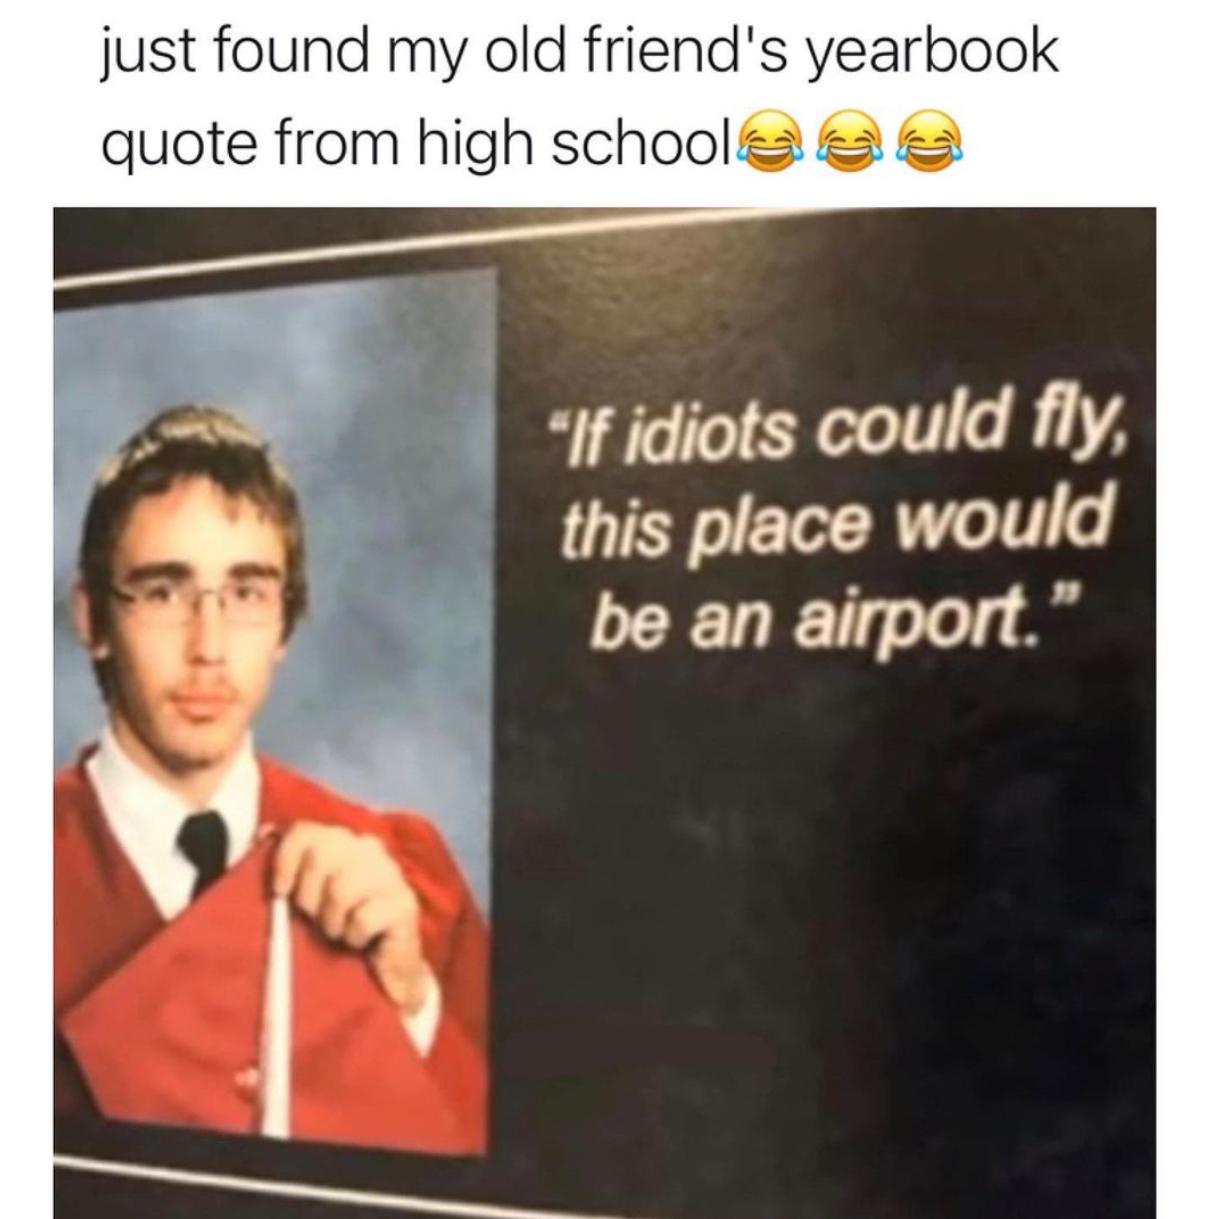 funny pics and memes - human behavior - just found my old friend's yearbook quote from high schoole "If idiots could fly, this place would be an airport."